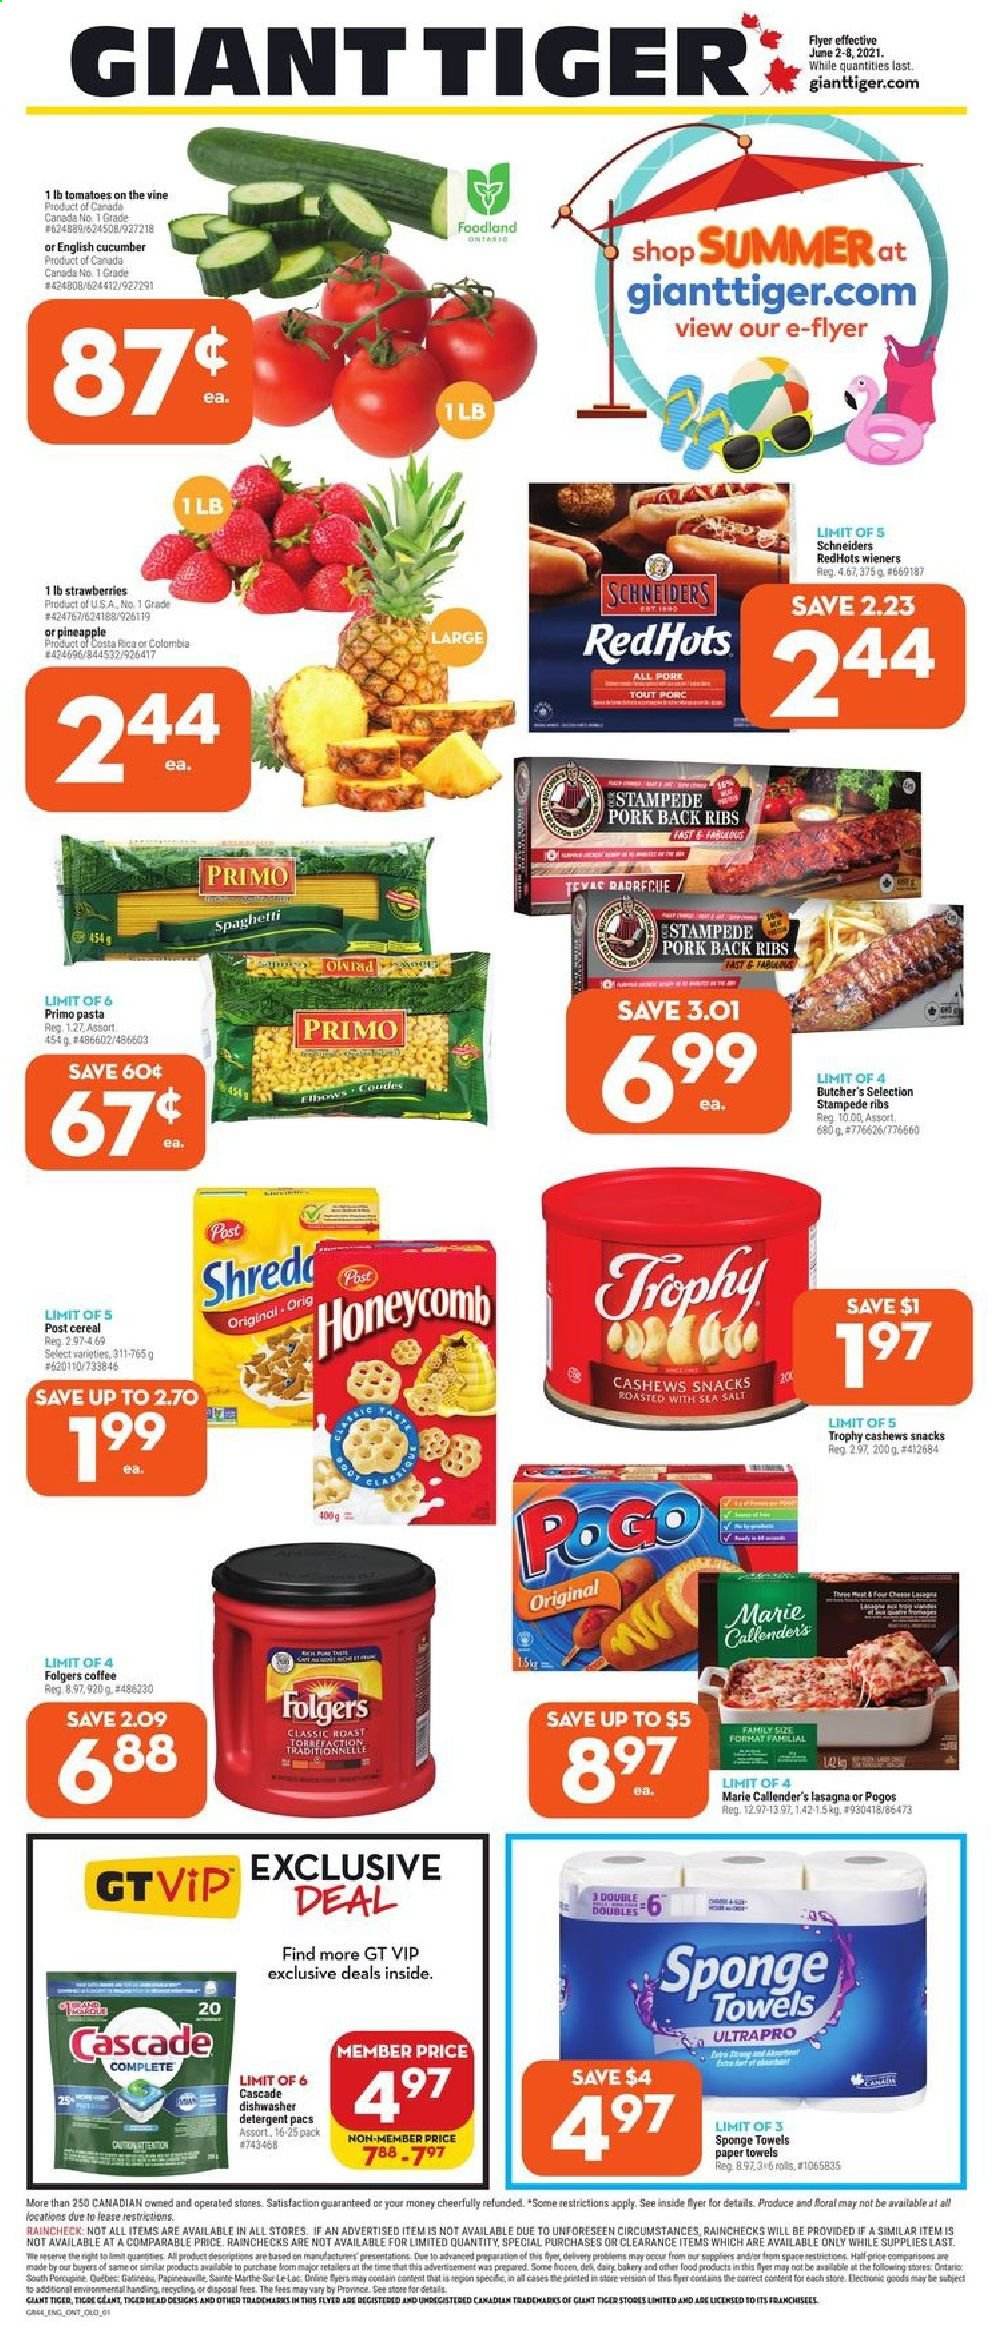 thumbnail - Giant Tiger Flyer - June 02, 2021 - June 08, 2021 - Sales products - tomatoes, strawberries, spaghetti, pasta, lasagna meal, Marie Callender's, snack, salt, cereals, cashews, coffee, Folgers, pork meat, pork ribs, pork back ribs, kitchen towels, paper towels, Cascade, sponge, trophy cup. Page 1.